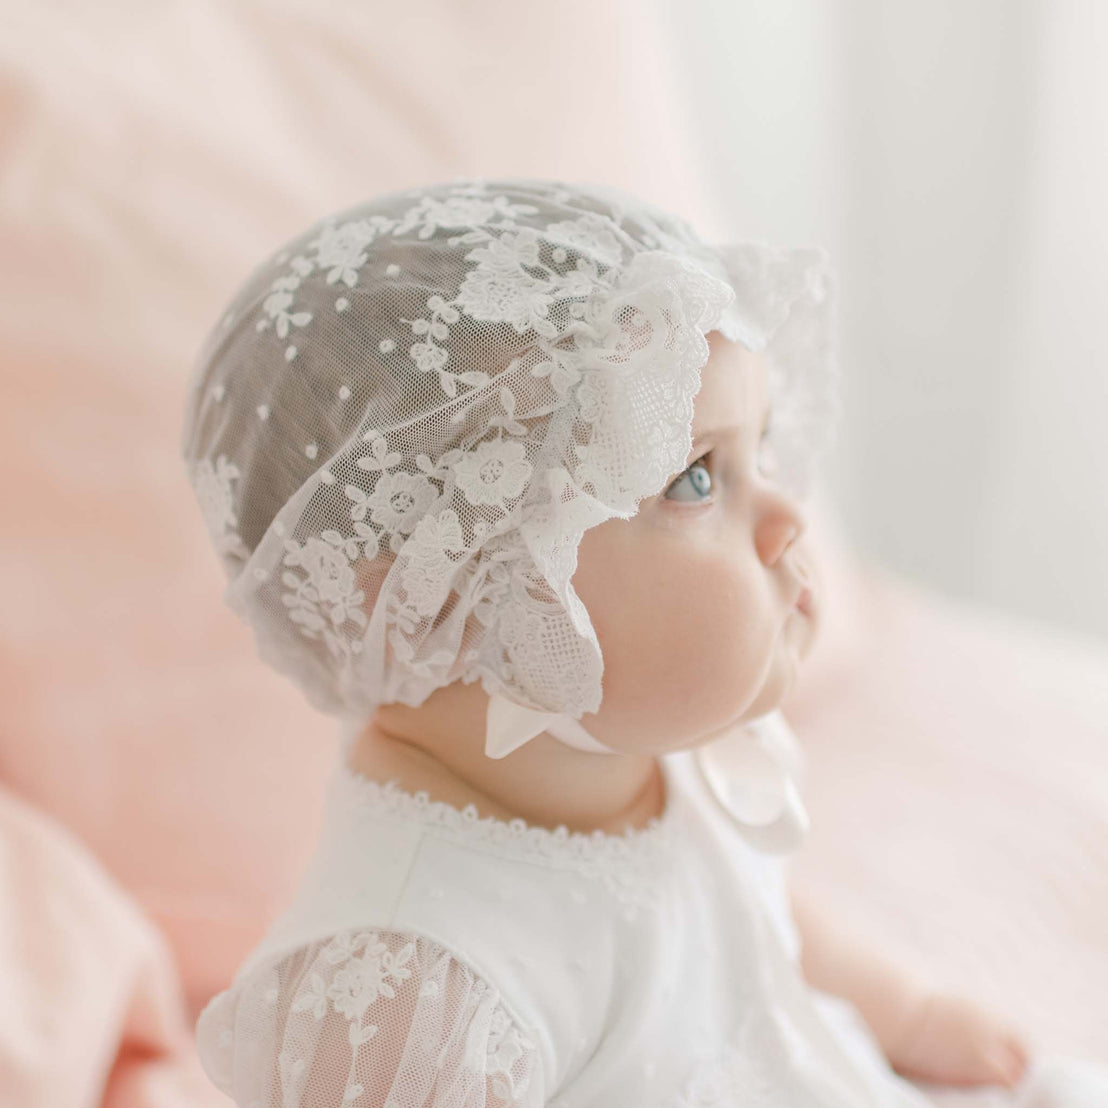 A baby wearing the Melissa Christening Gown & Bonnet, a matching outfit adorned with Venice lace trim, is sitting and looking to the side. This charming ensemble, handmade in the USA, perfectly complements the soft, pink background that appears to be a bed or cushioned surface.